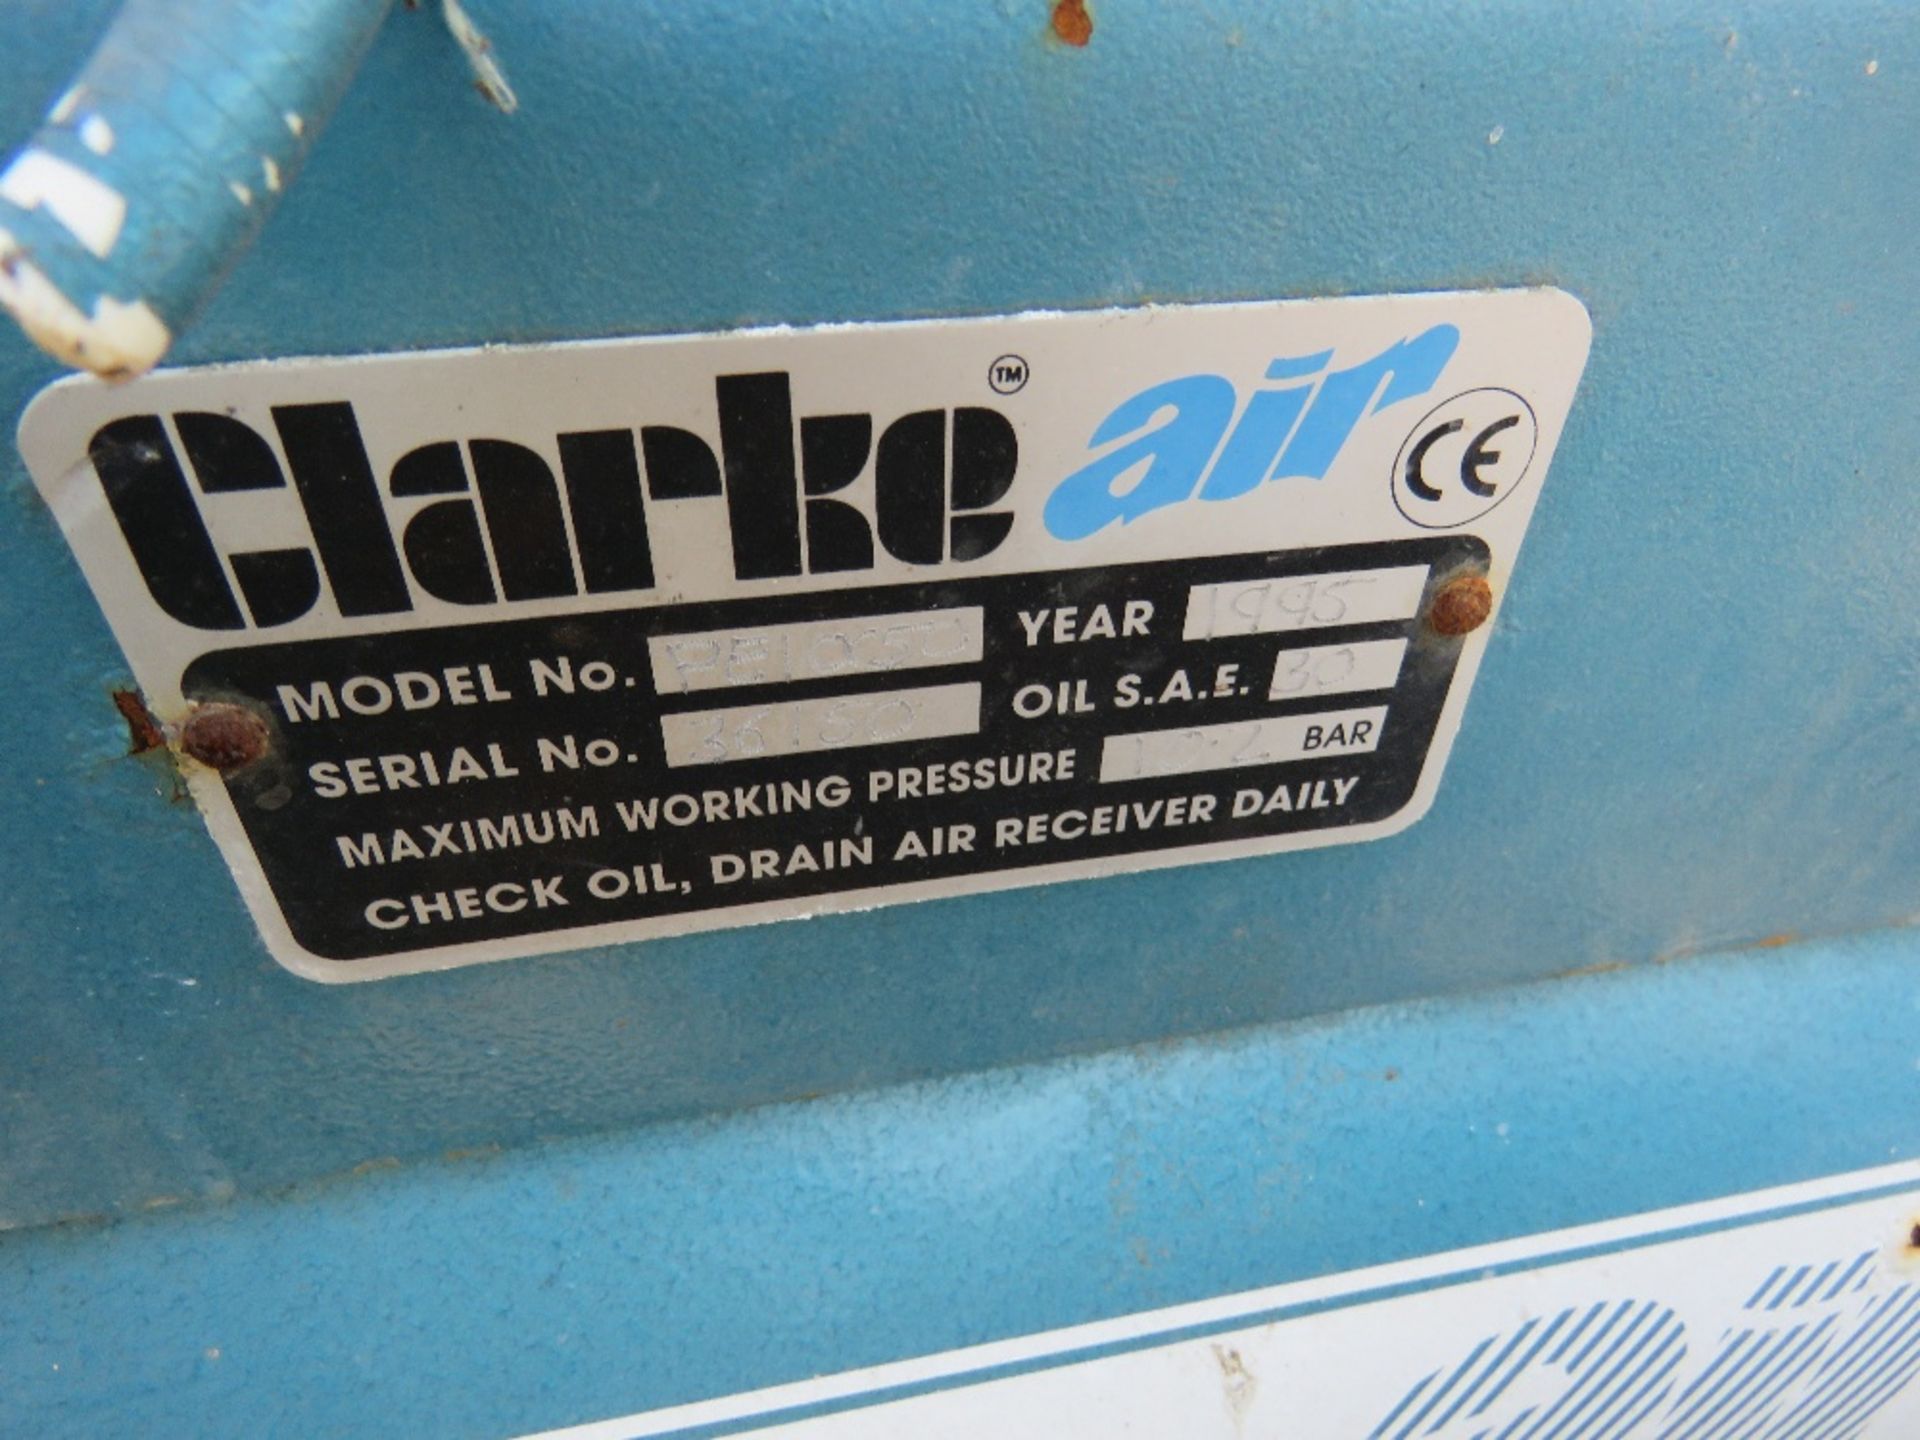 2 X AIR COMPRESSORS. - Image 4 of 4